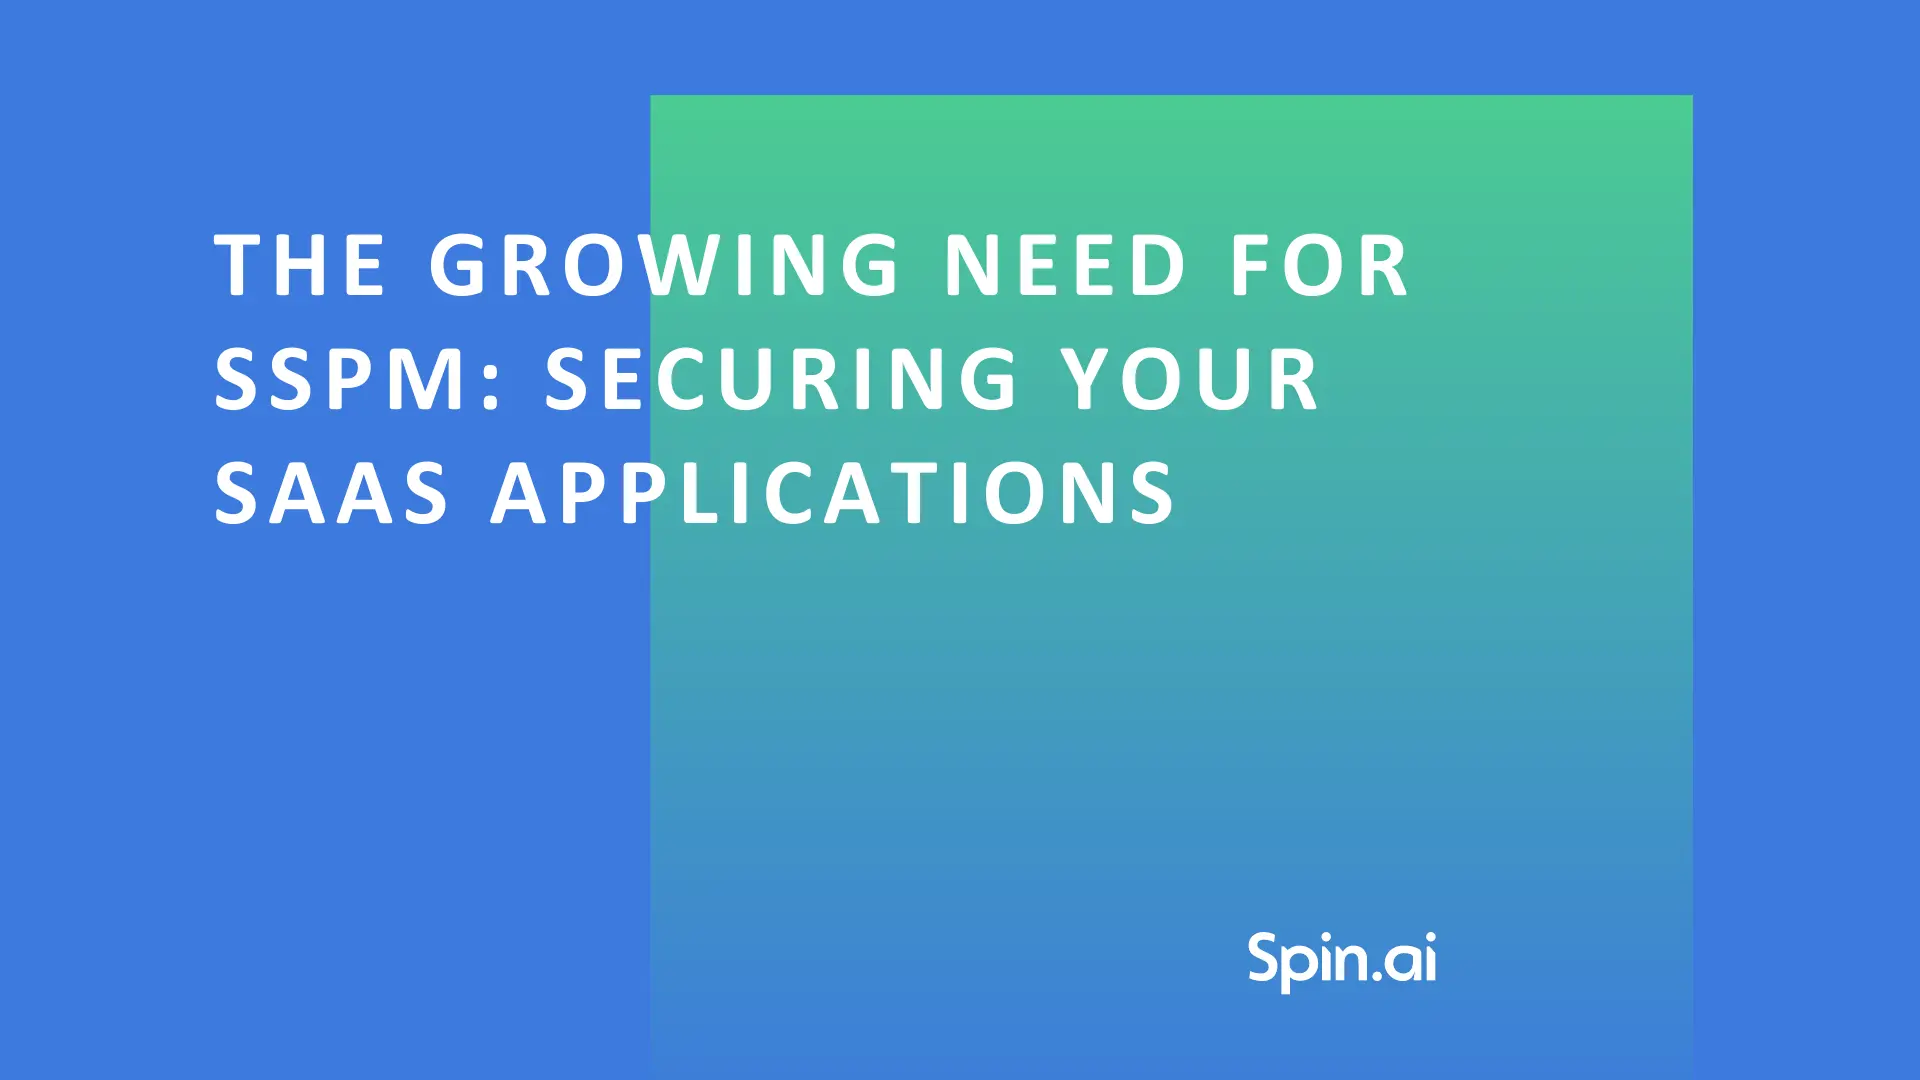 The Growing Need for SSPM: Securing Your SaaS Applications